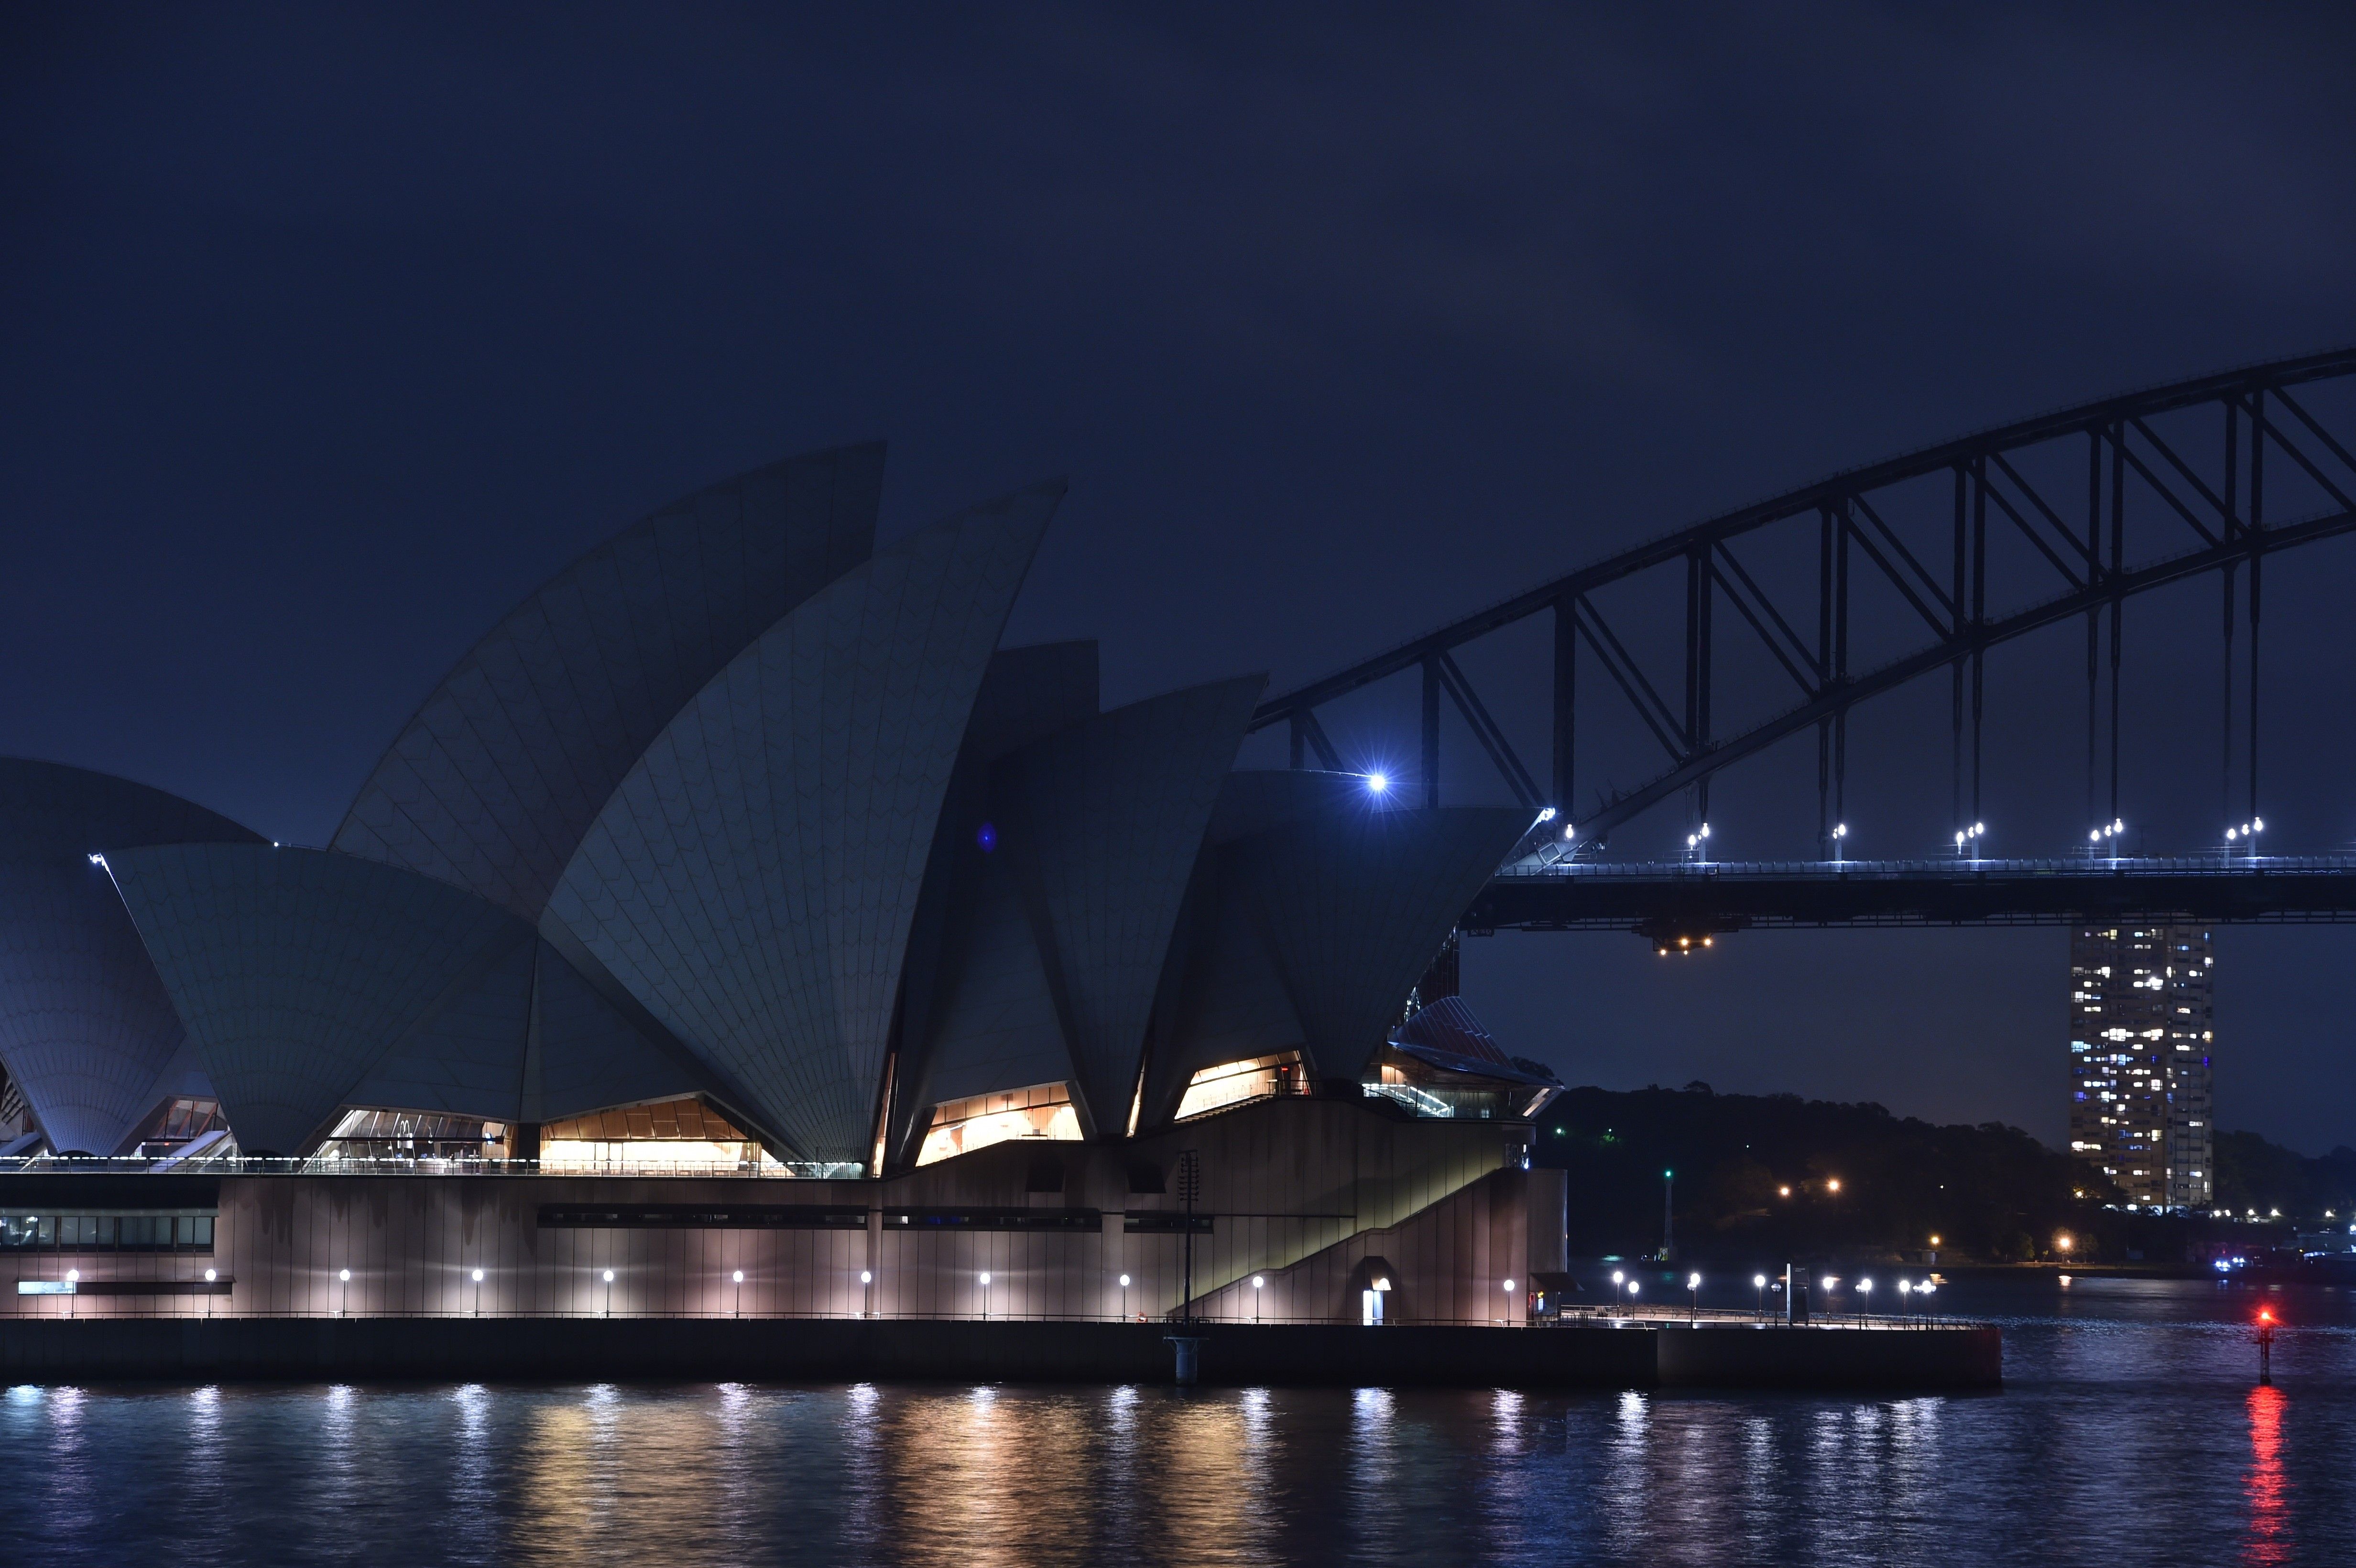 Sydney Harbour Bridge and the Opera House are plunged into darkness for the Earth Hour event